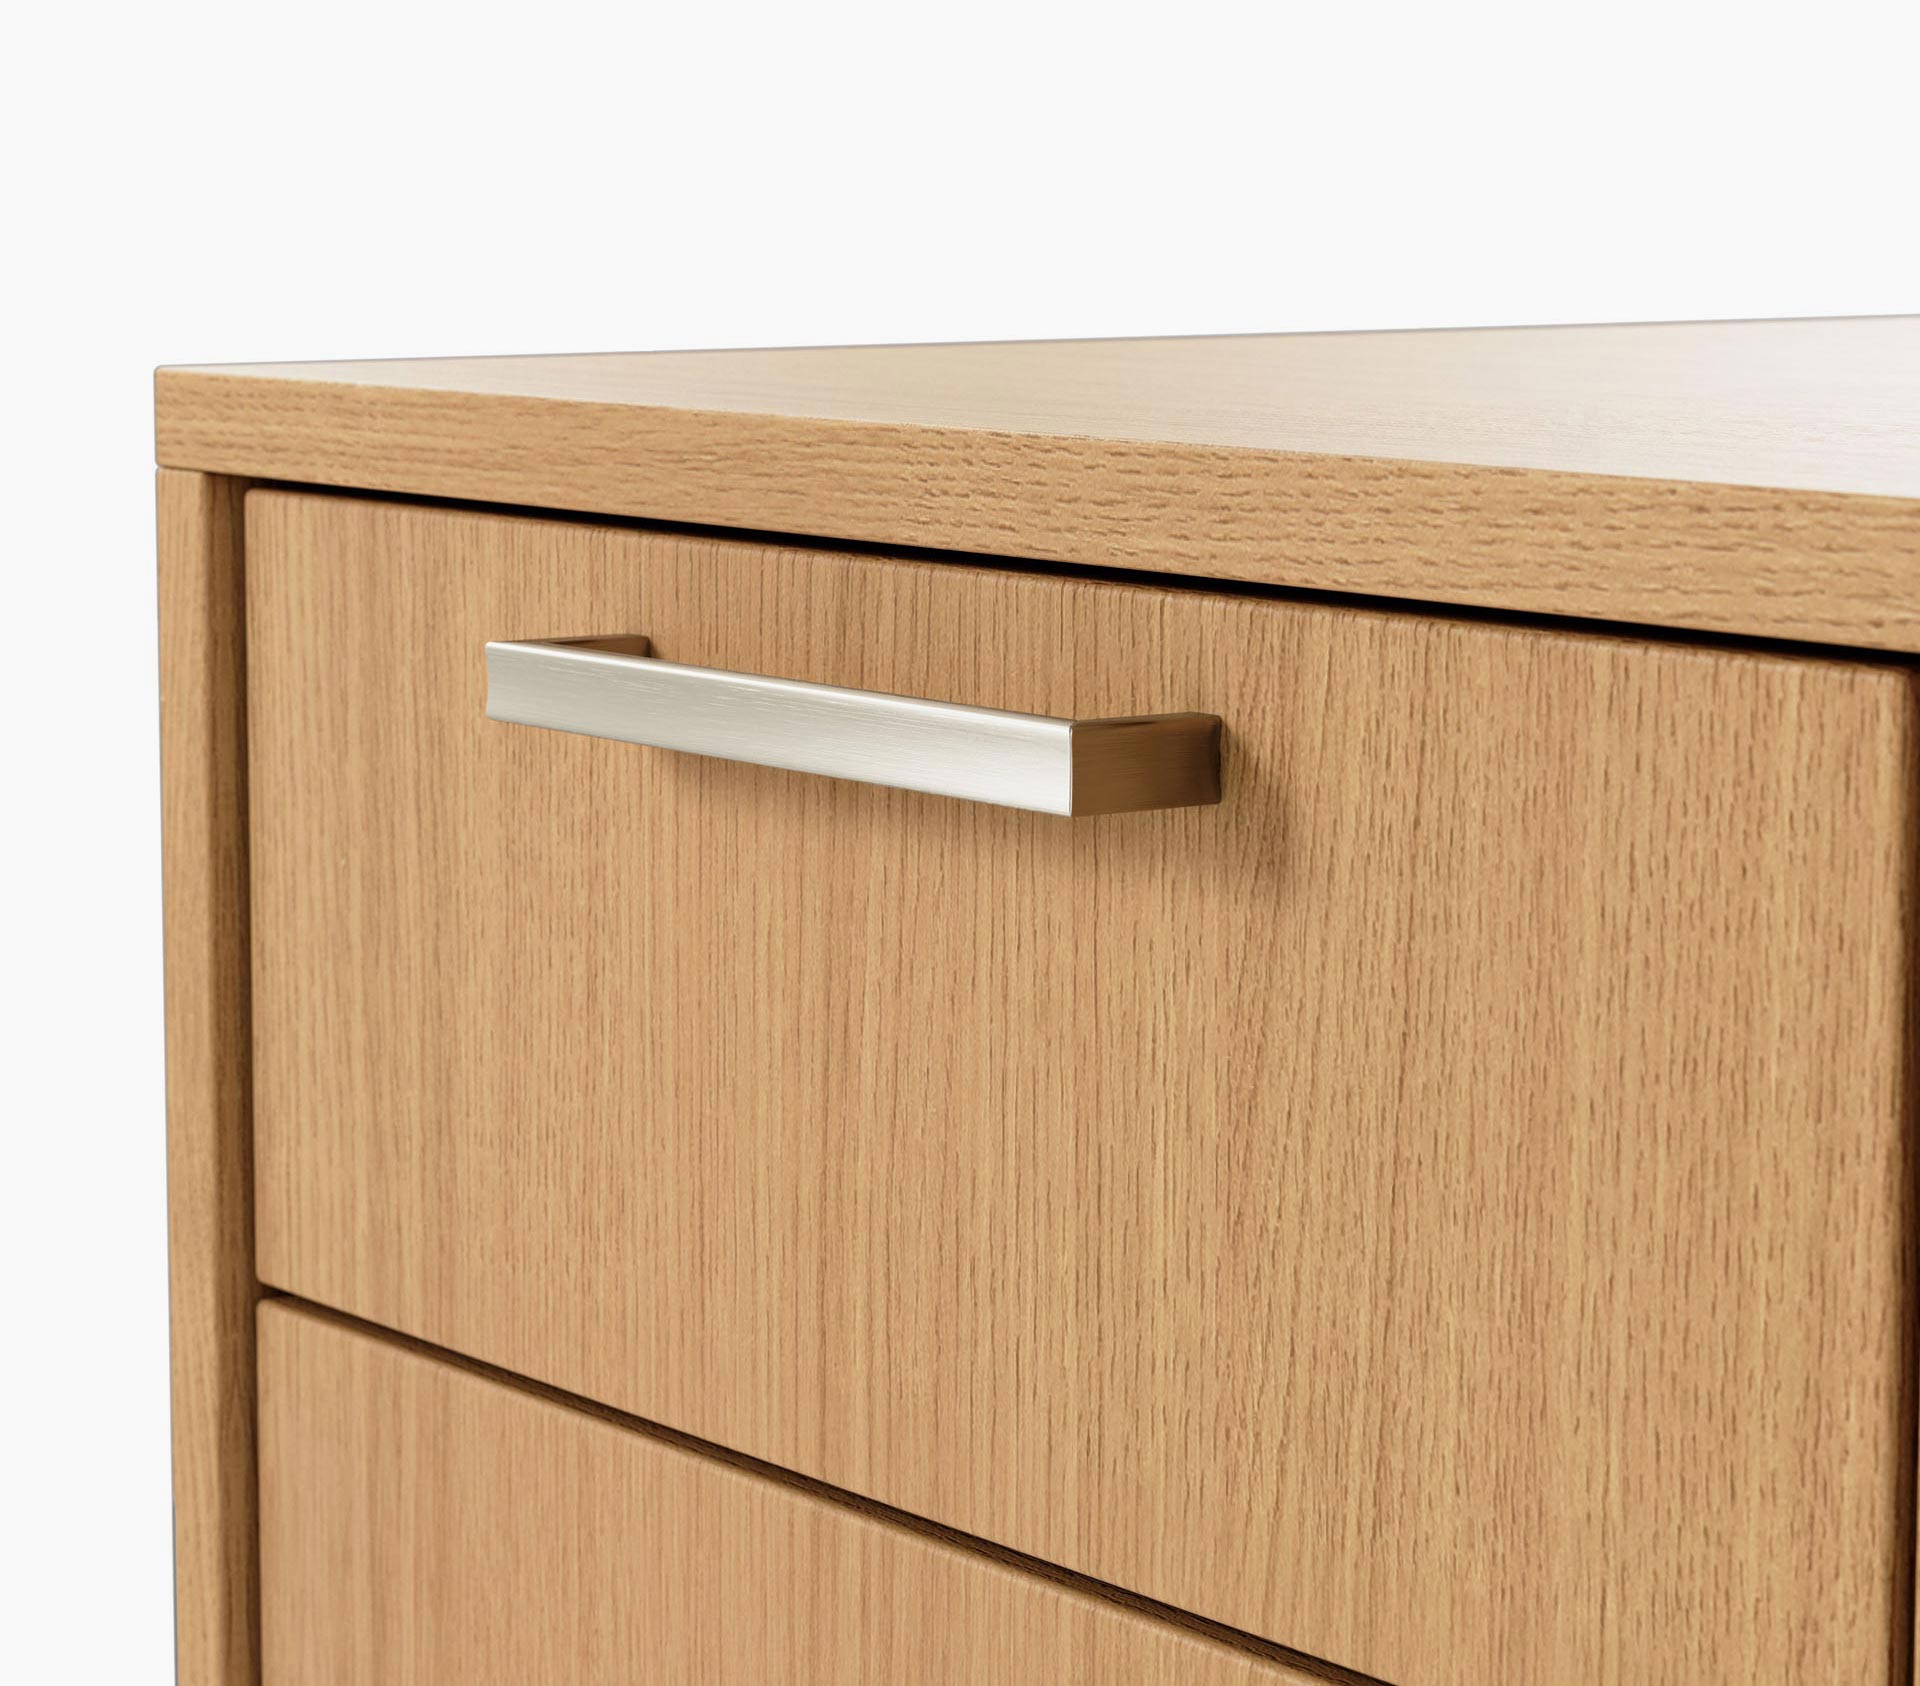 Drawer pull detail on a JD Credenza in natural rift cut oak with satin nickel pulls